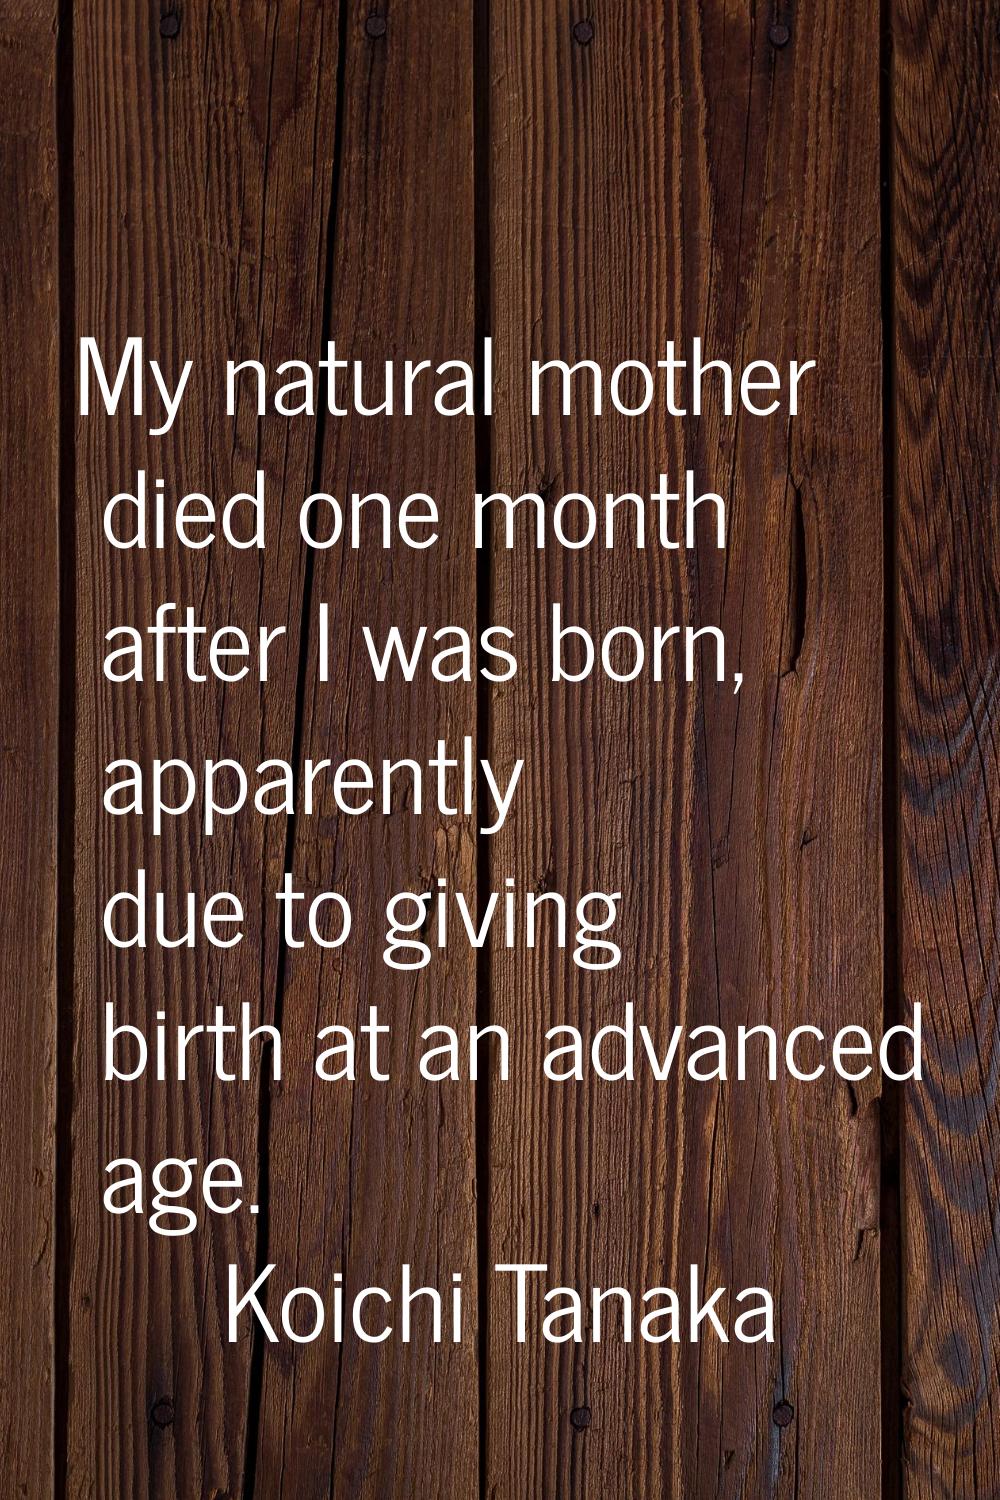 My natural mother died one month after I was born, apparently due to giving birth at an advanced ag